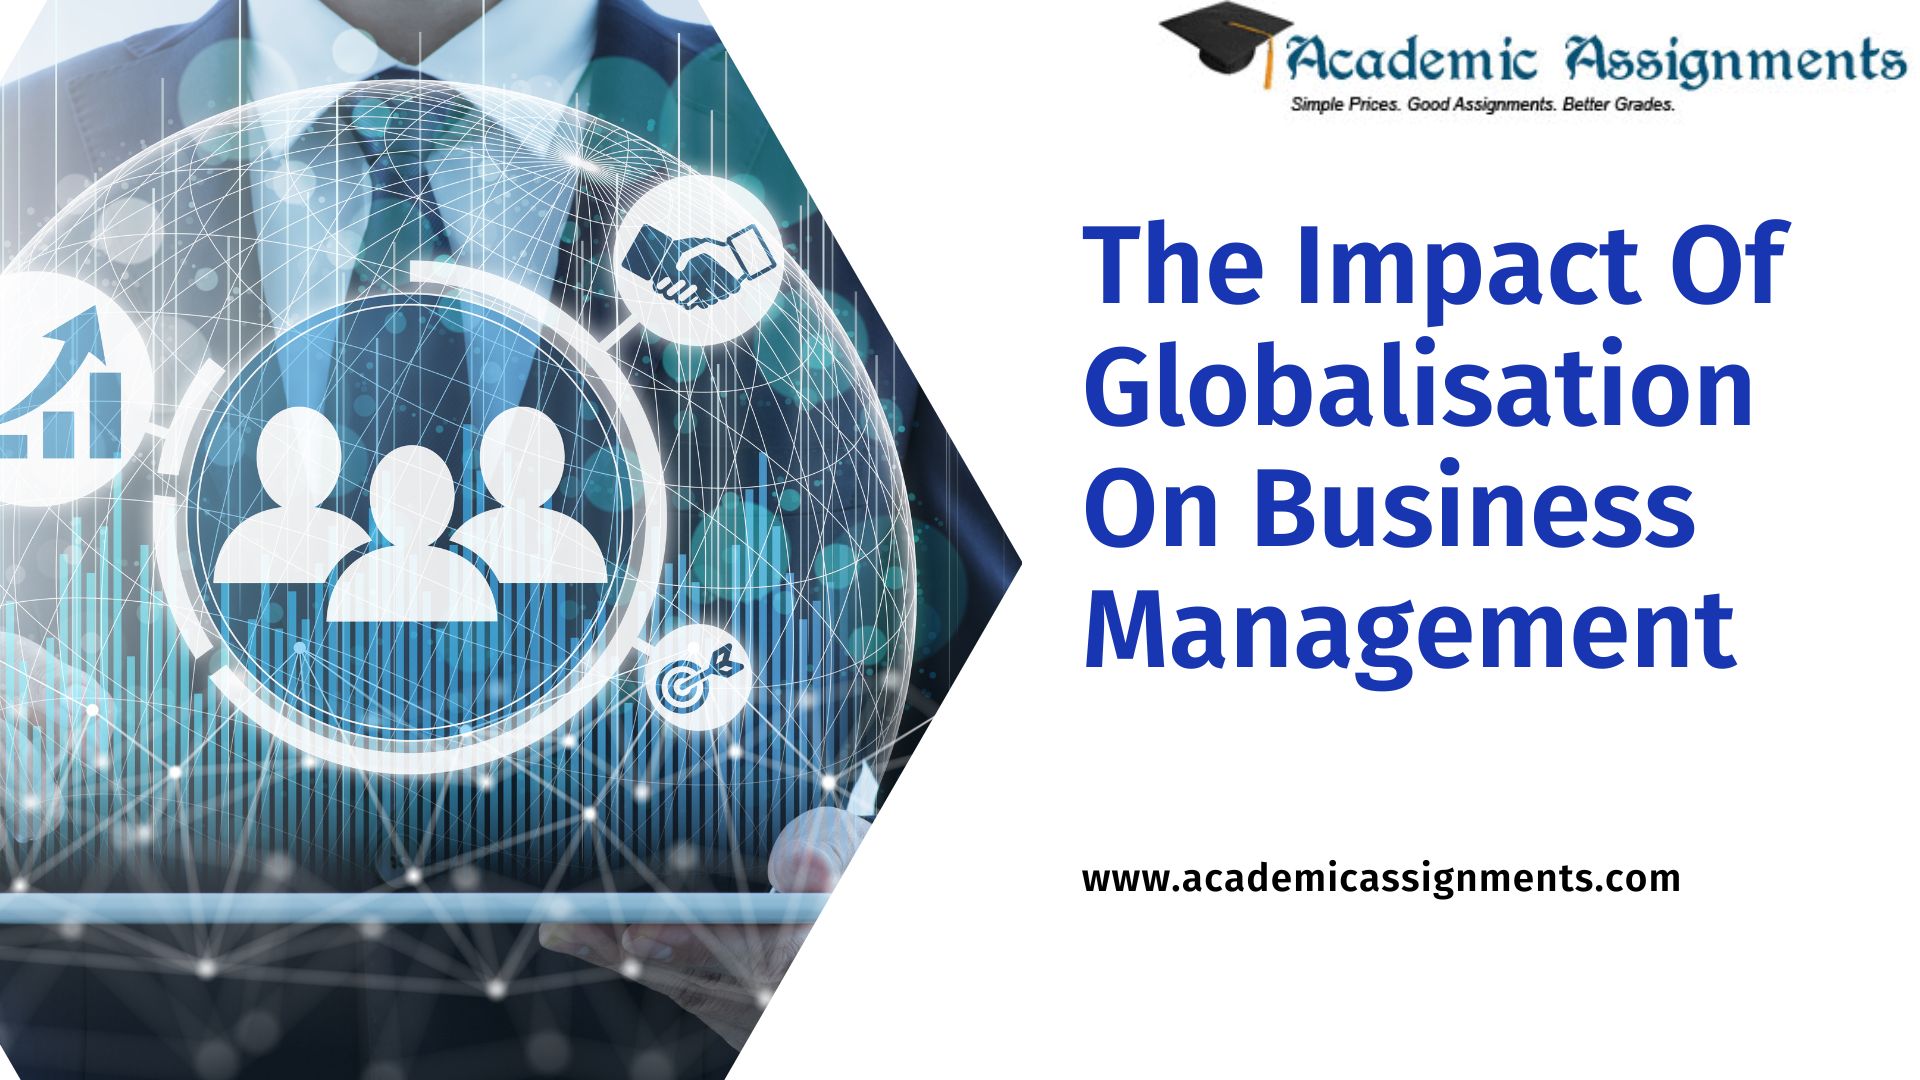 The Impact Of Globalisation On Business Management